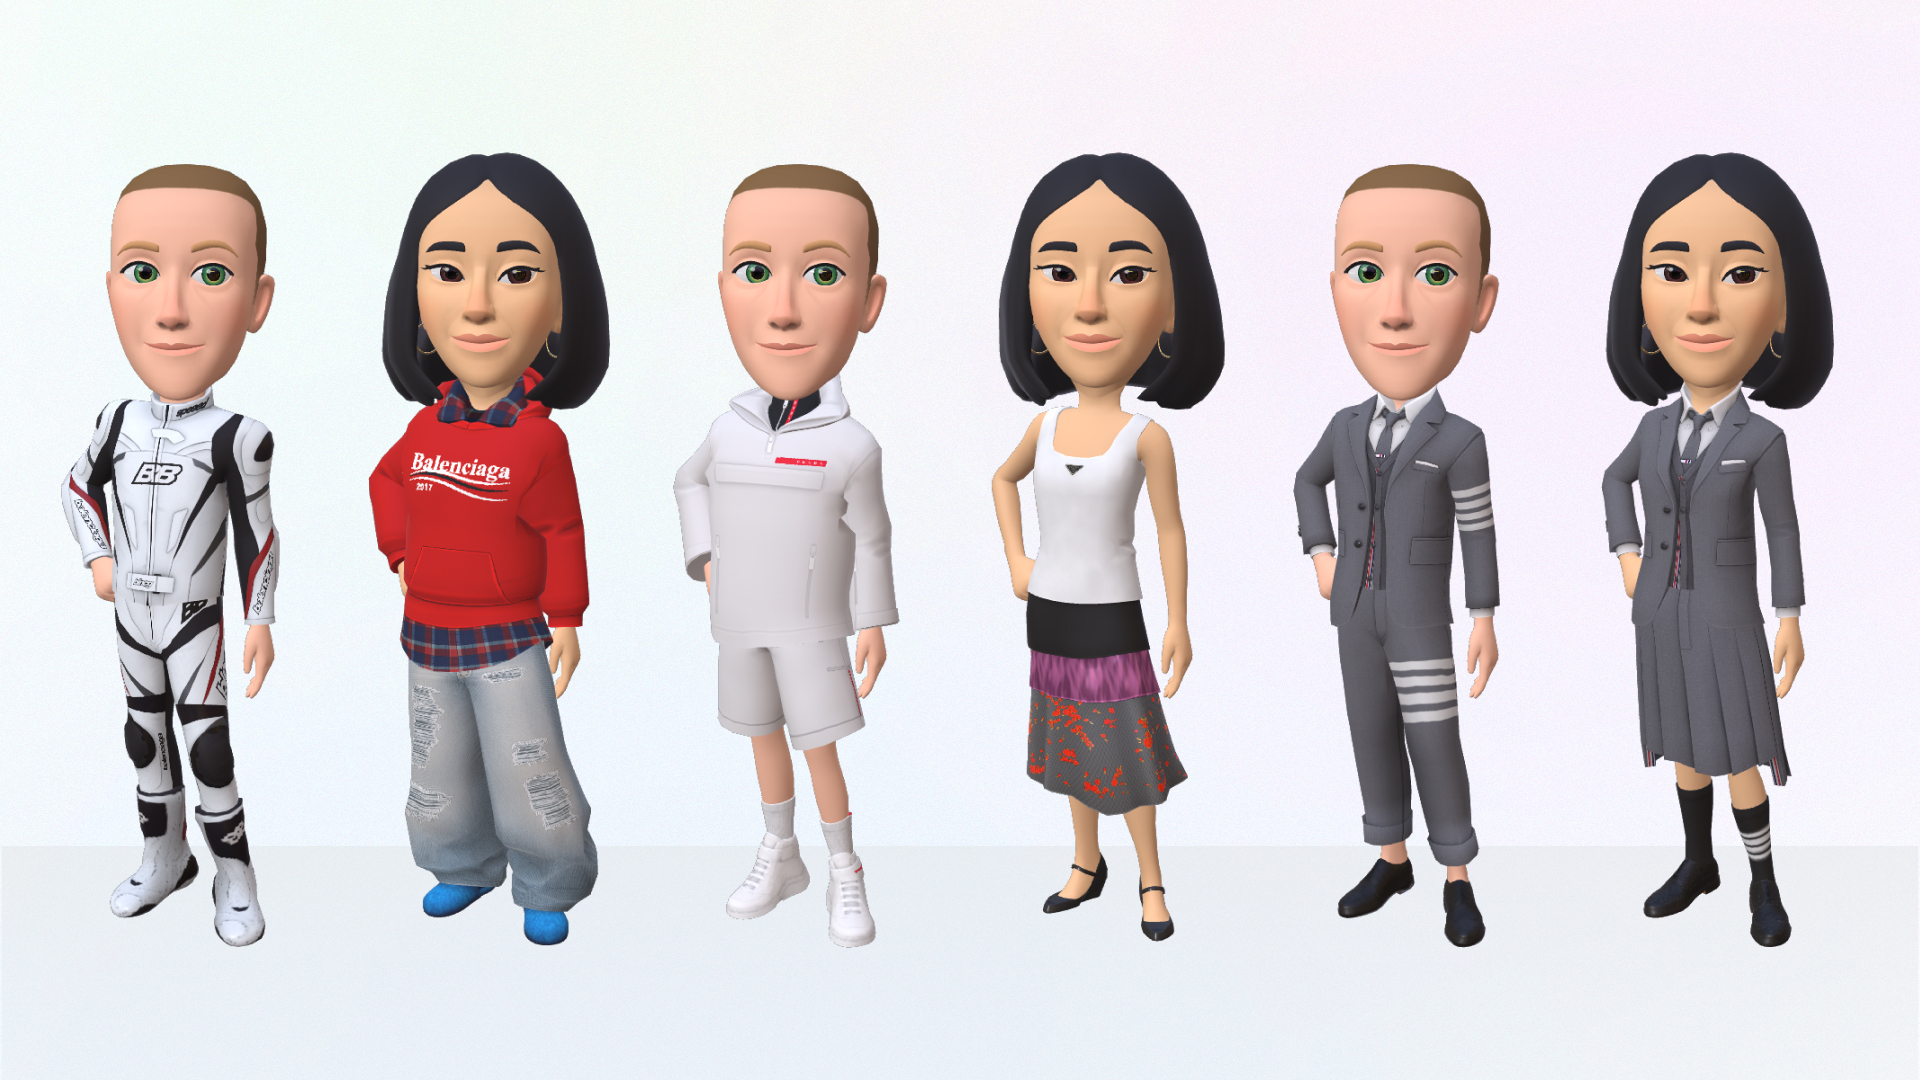 VR Chat Avatar Creator Commits To Fixes  New Options For Better  Representation